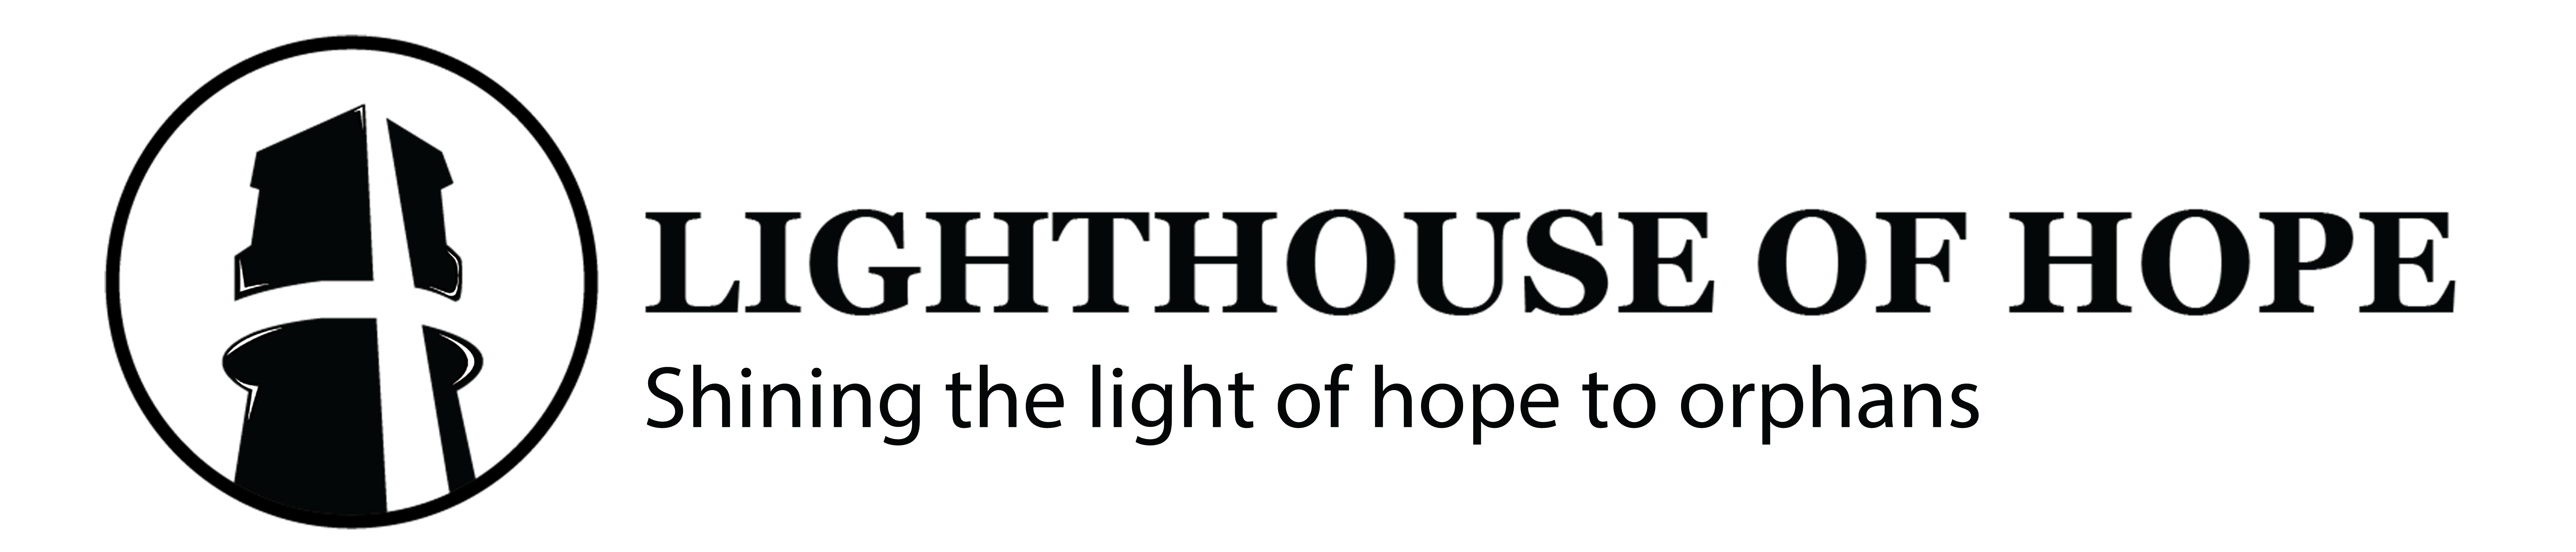 Lighthouse Of Hope